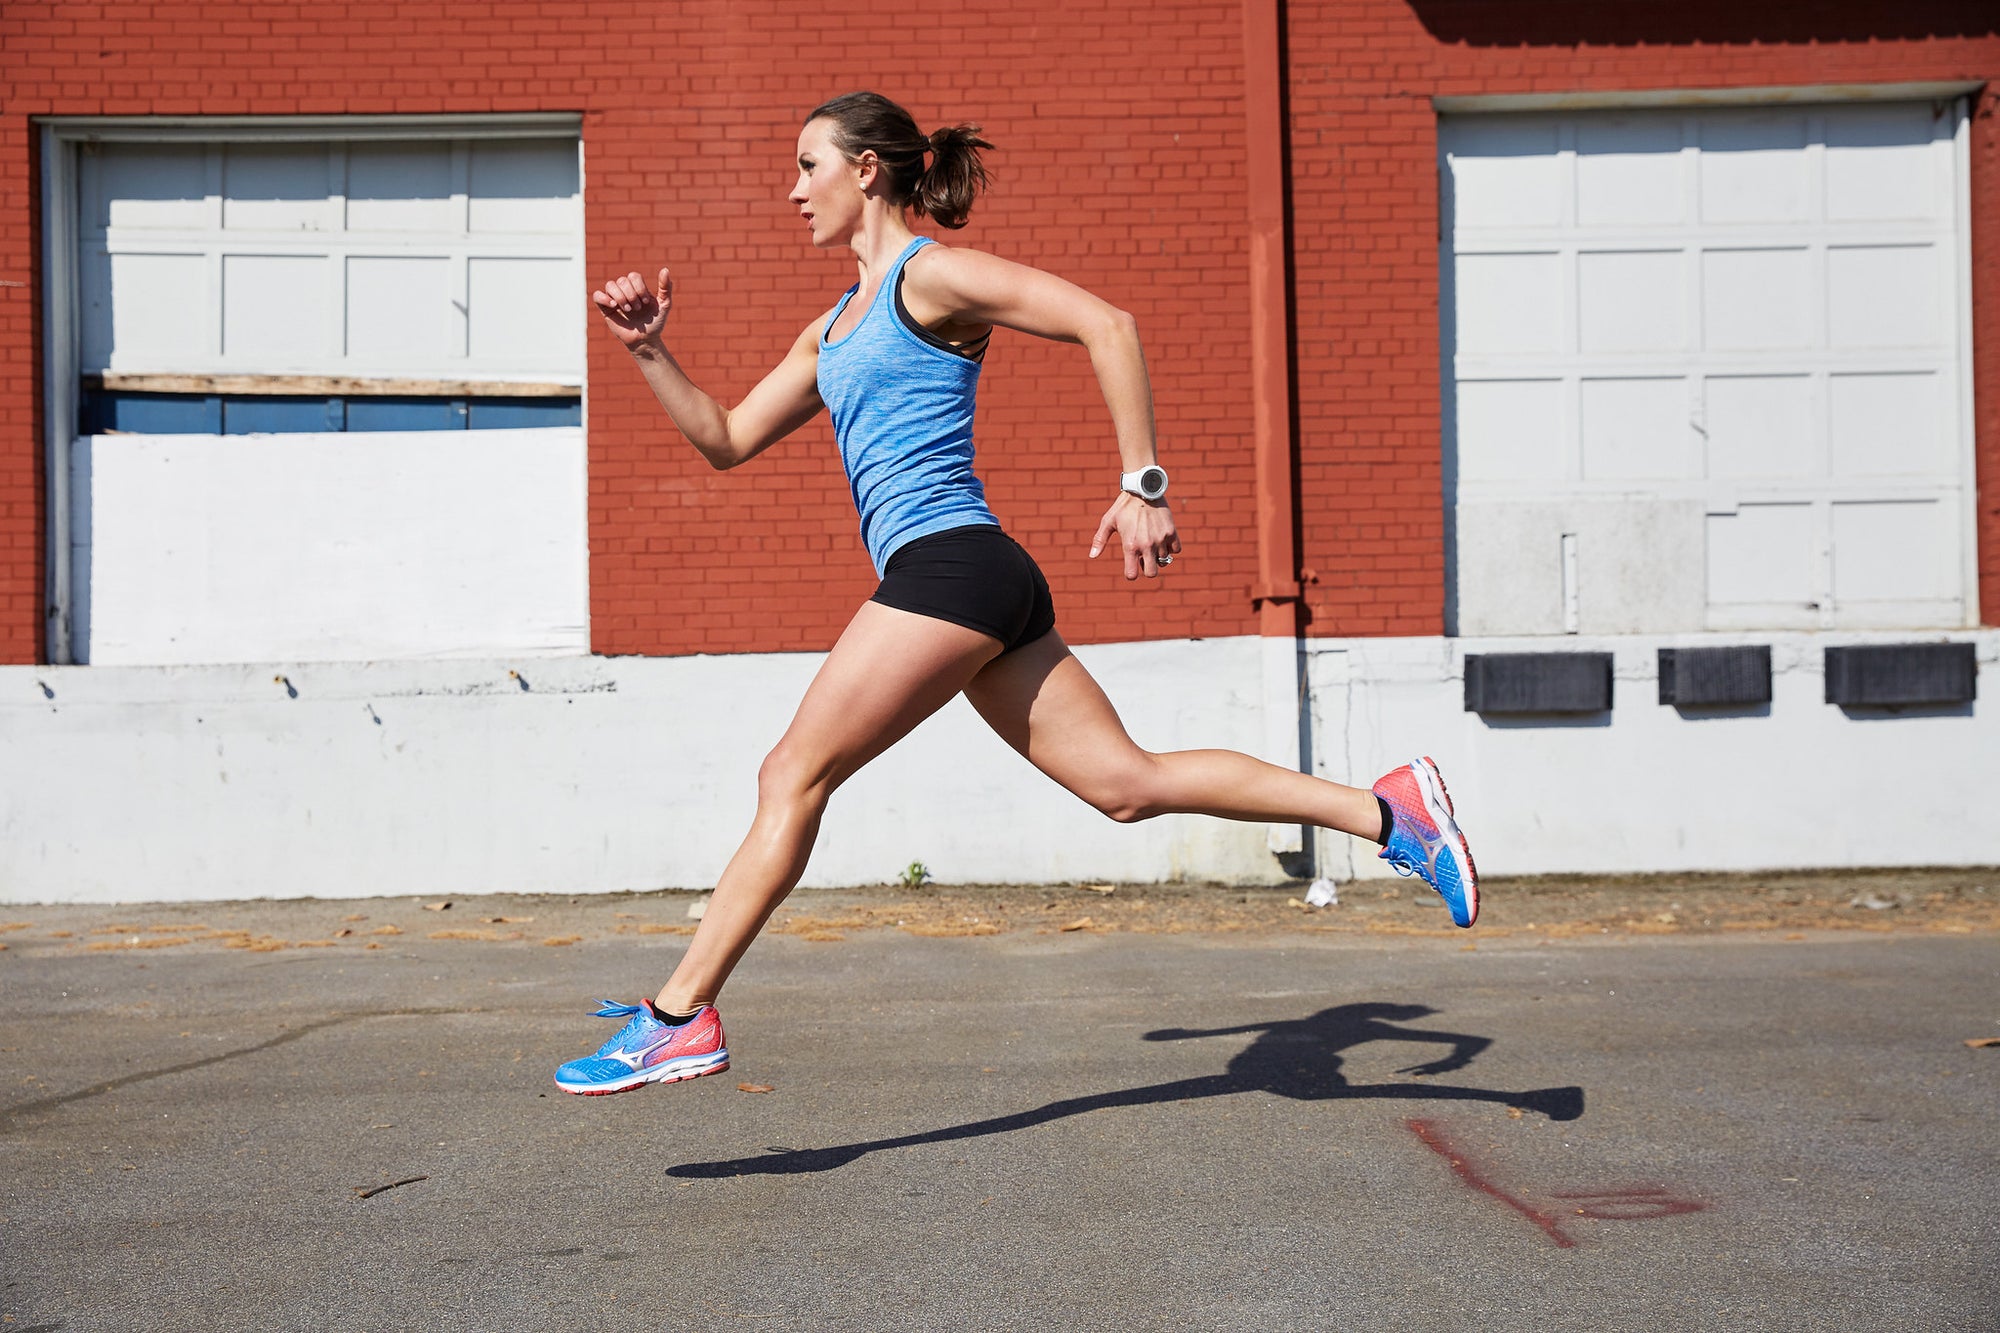 How To Find Your Why With Swiftwick Athlete, Amanda Foland